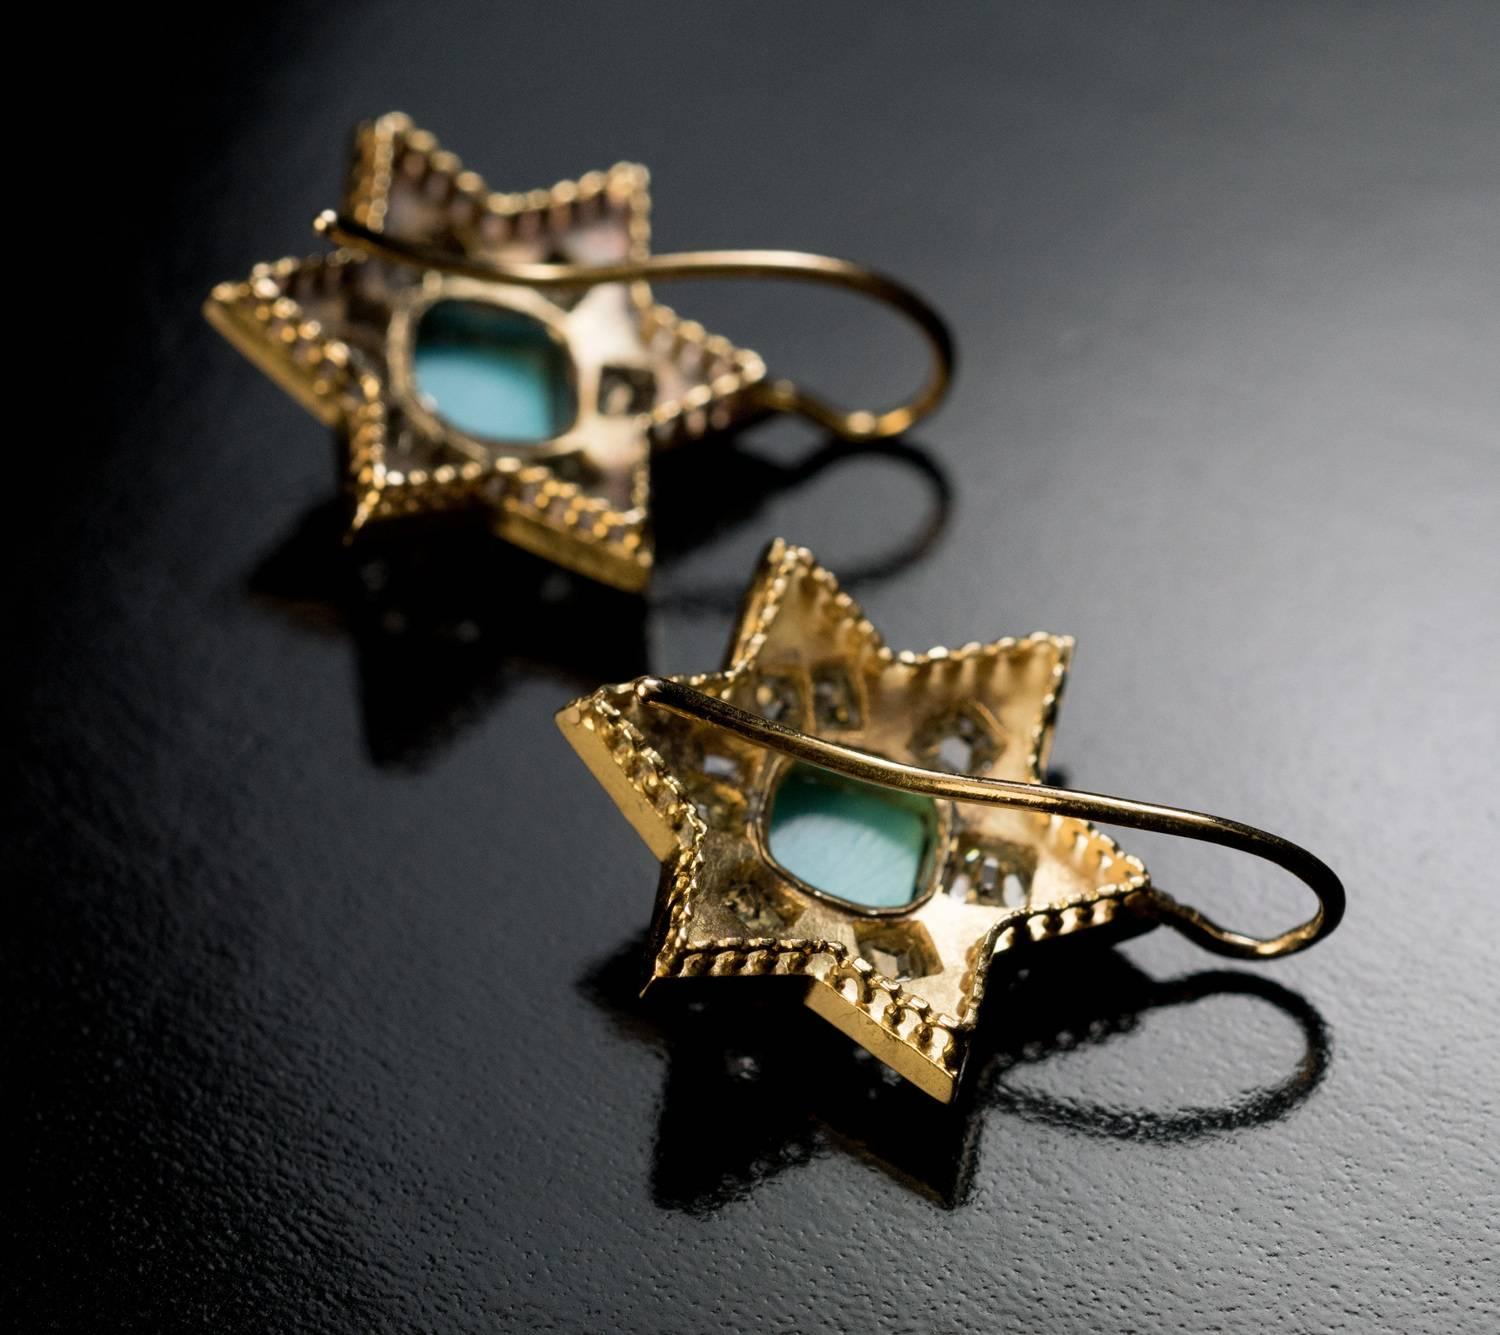 Circa 1870s

A pair of antique Victorian era star-shaped earrings is handcrafted in 14K gold. Each earring is centered with a square cabochon cut turquoise surrounded by densely set chunky old mine and rose cut diamonds. The borders of the stars are